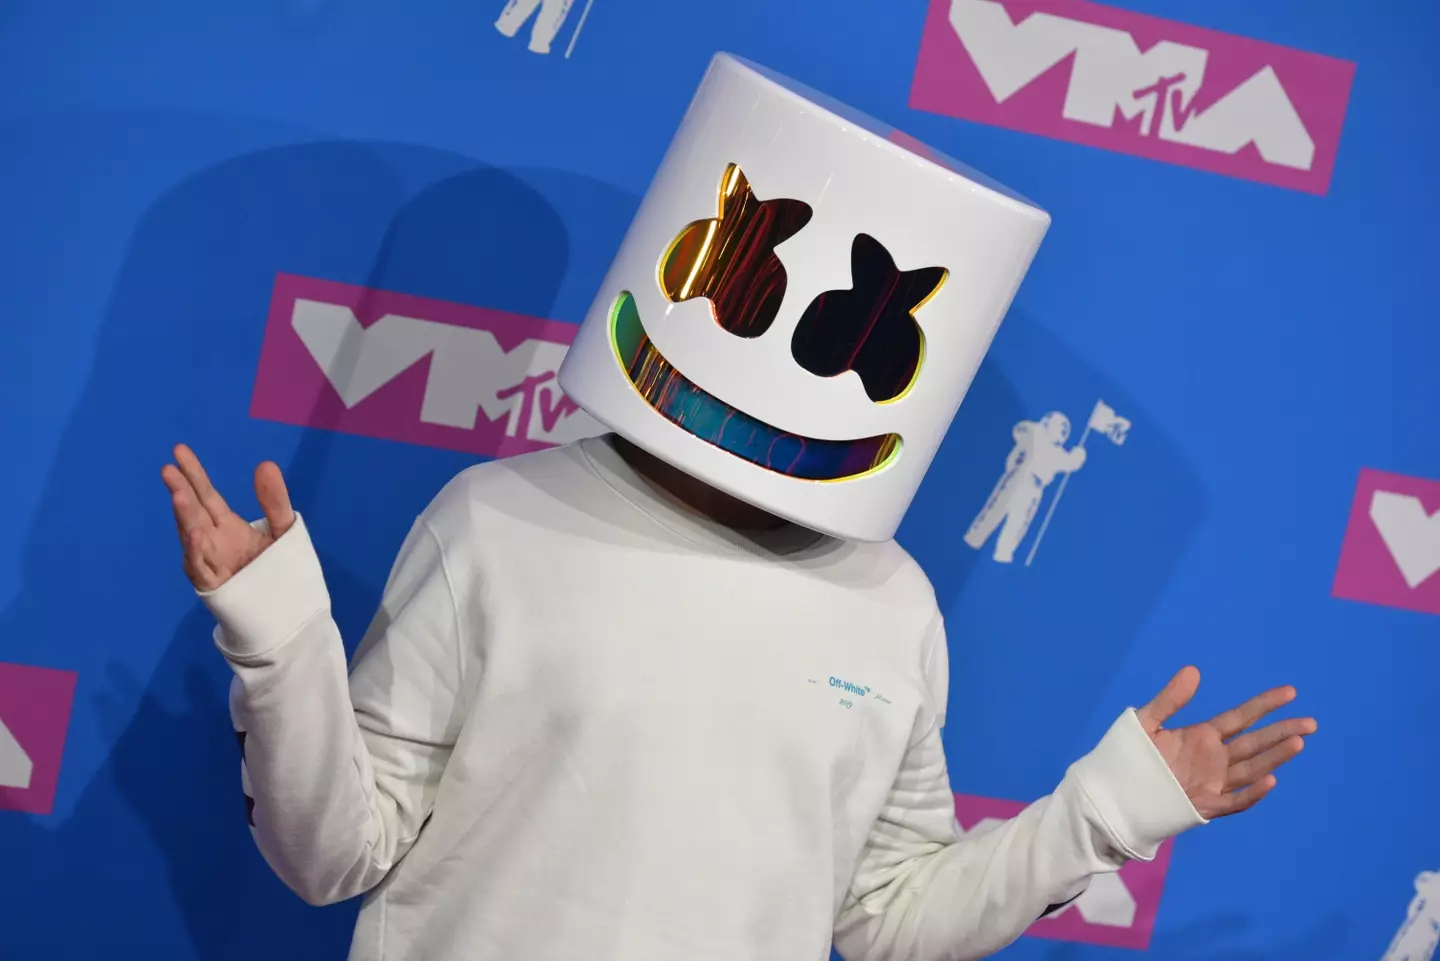 Could this be the man behind Marshmello? (